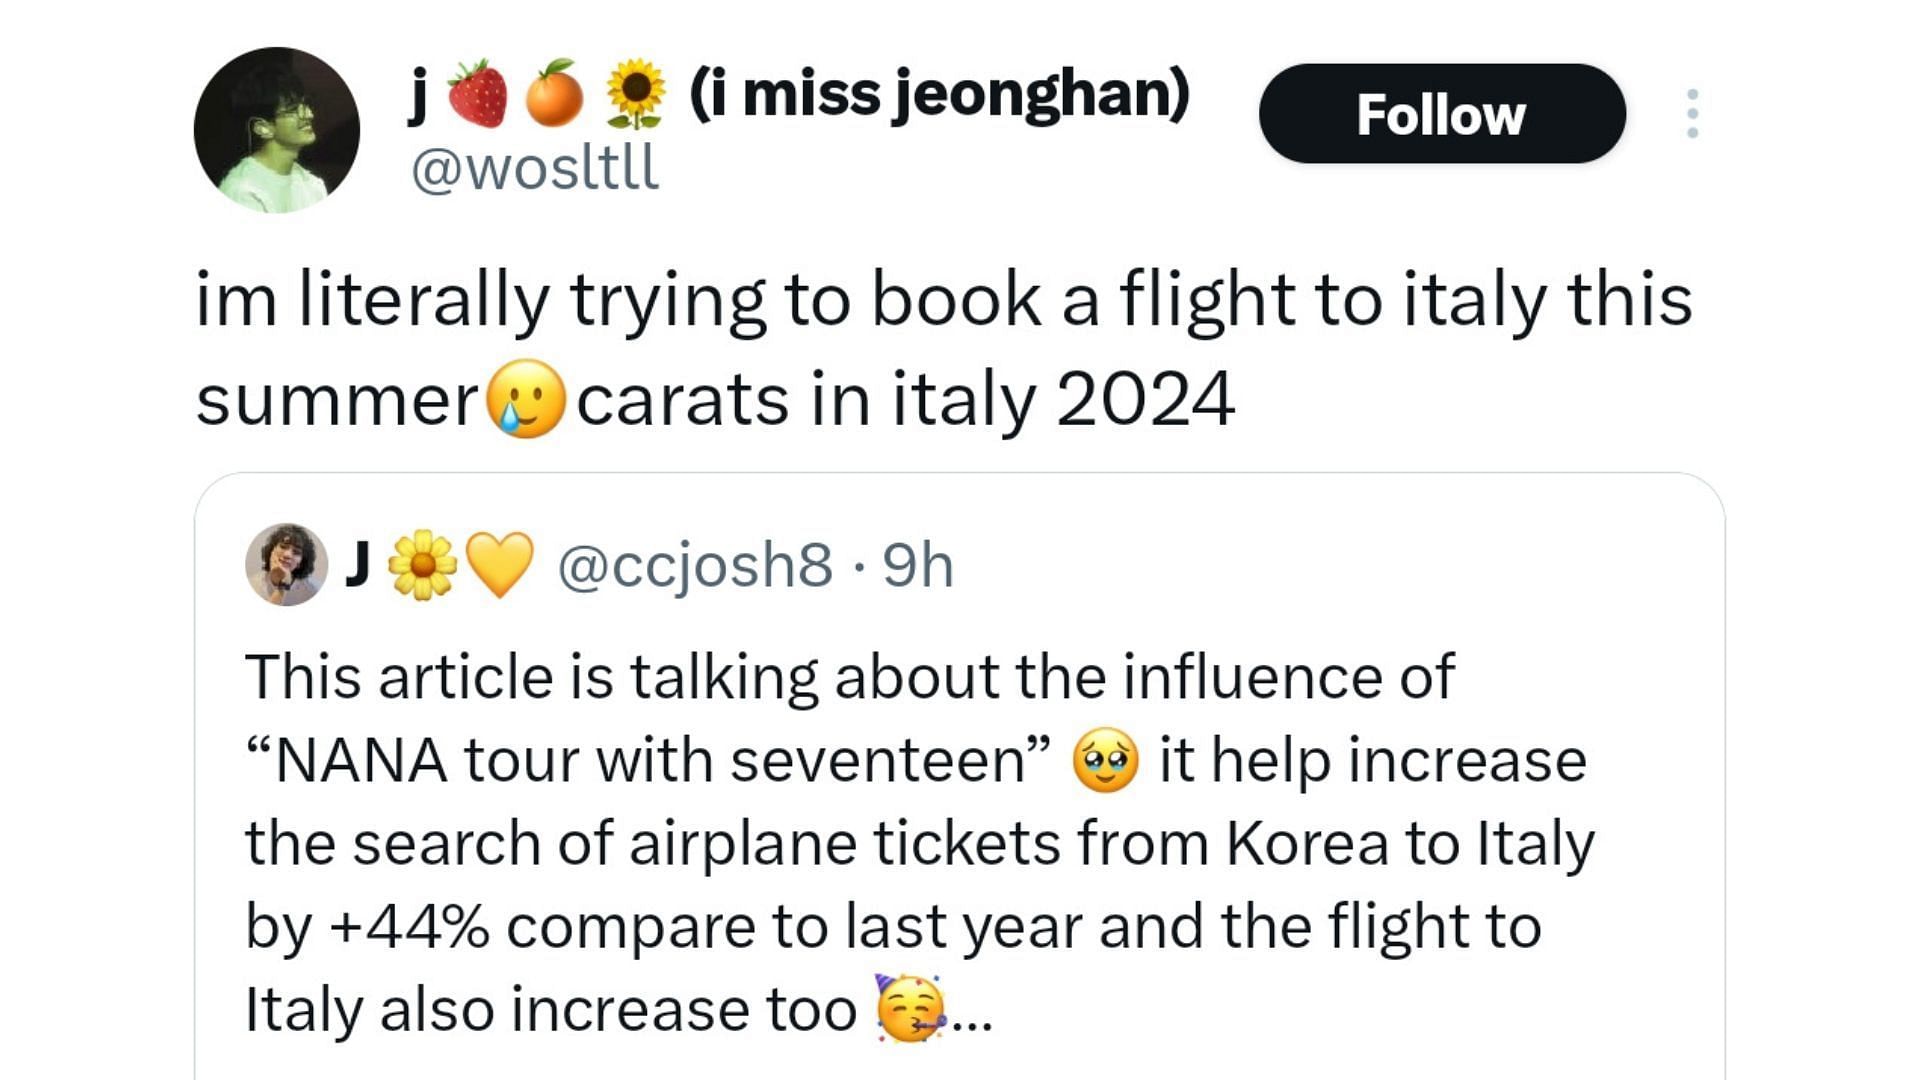 Fans react as NANA TOUR with SEVENTEEN increases flight ticket search from Korea to Italy (Image Via X/@wosltll)